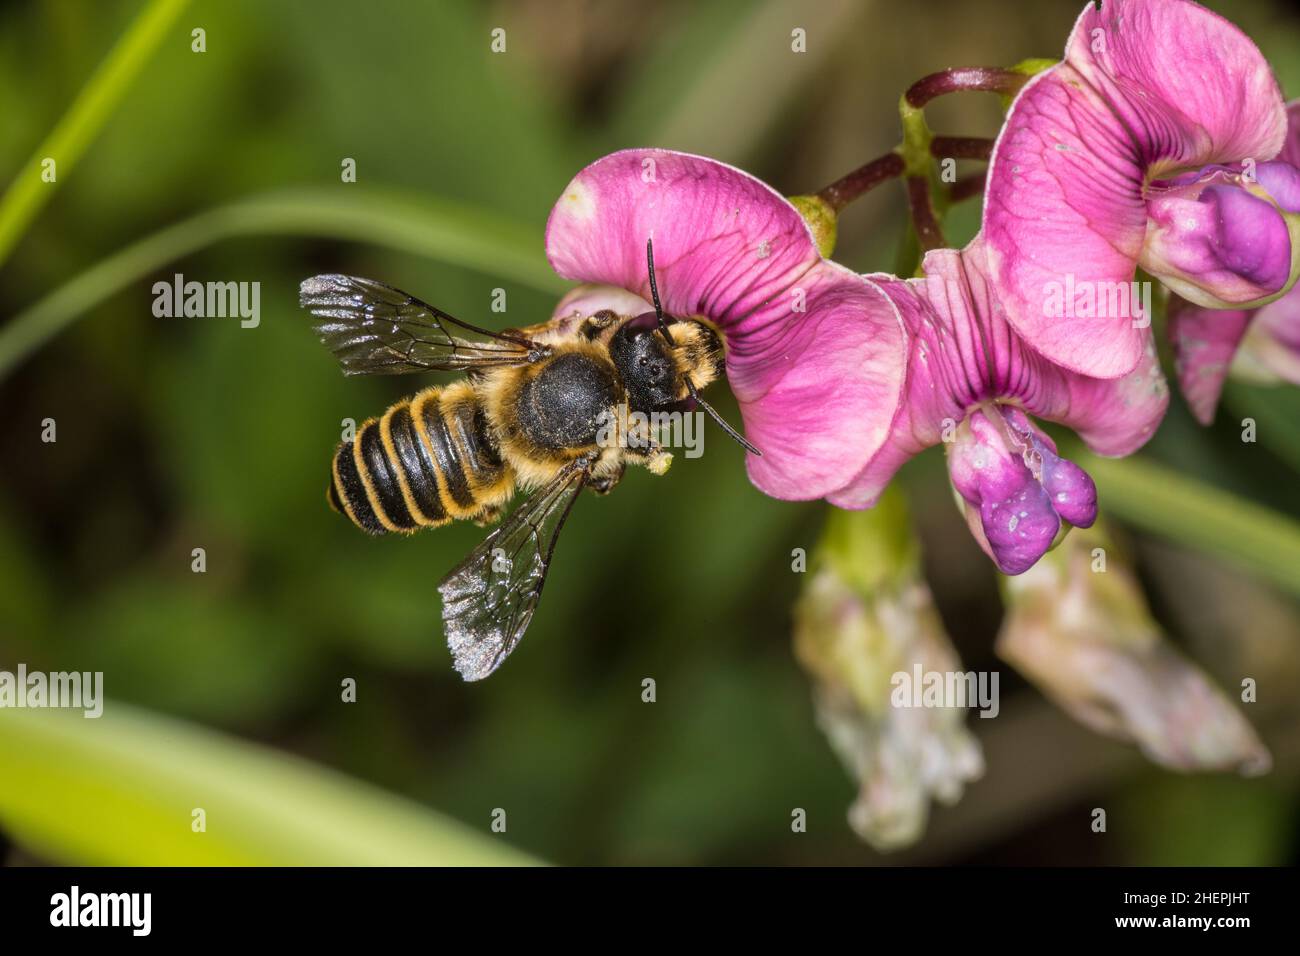 Leafcutter bee, Leafcutter-bee (Megachile ericetorum, Chalicodoma ericetorum, Pseudomegachile ericetorum), on a vetchling flower, Germany Stock Photo